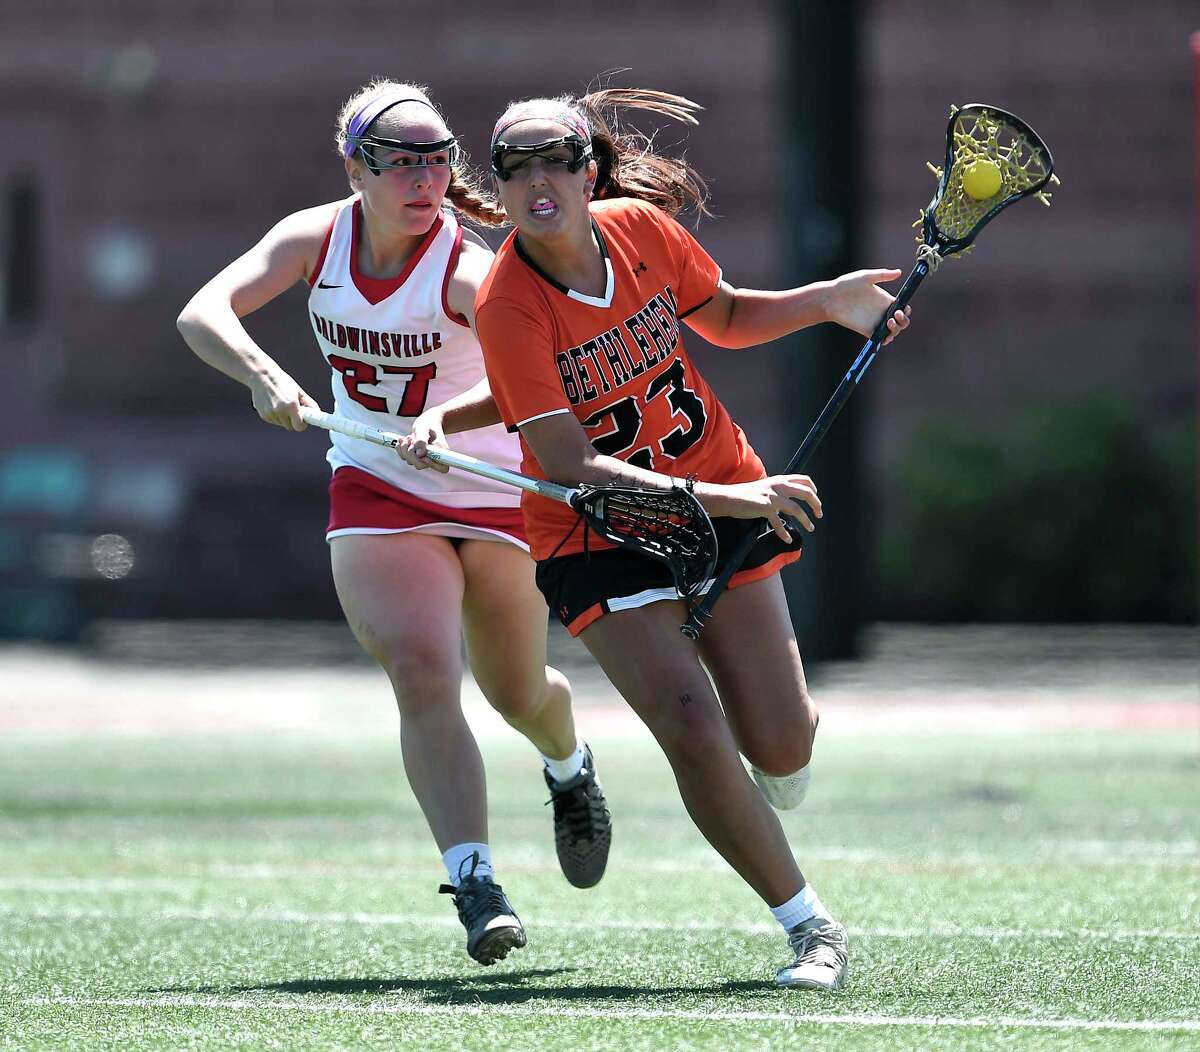 Bethlehem's Ella Stewart, right, beats the defense of Baldwinsville's Emma States during a Class A semifinal at the NYSPHSAA Girls Lacrosse Championships in Cortland, N.Y., Friday, June 7, 2019. Bethlehem’s season ended with a 15-14 overtime loss to Baldwinsville-III. (Adrian Kraus / Special to the Times Union)